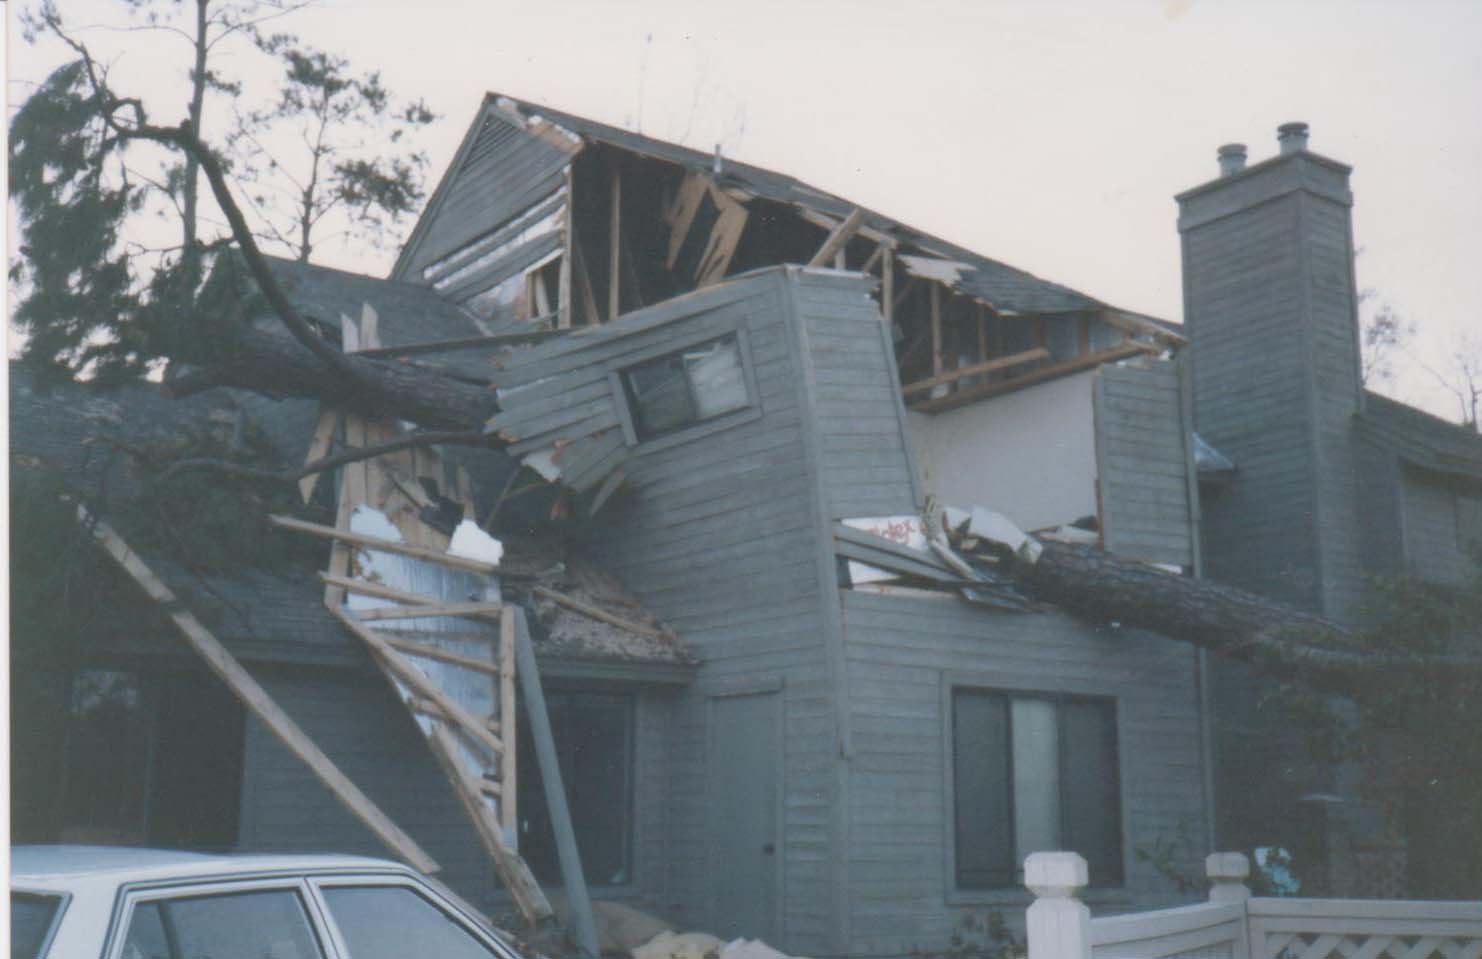 Hurricane Hugo: House with tree smashed in it